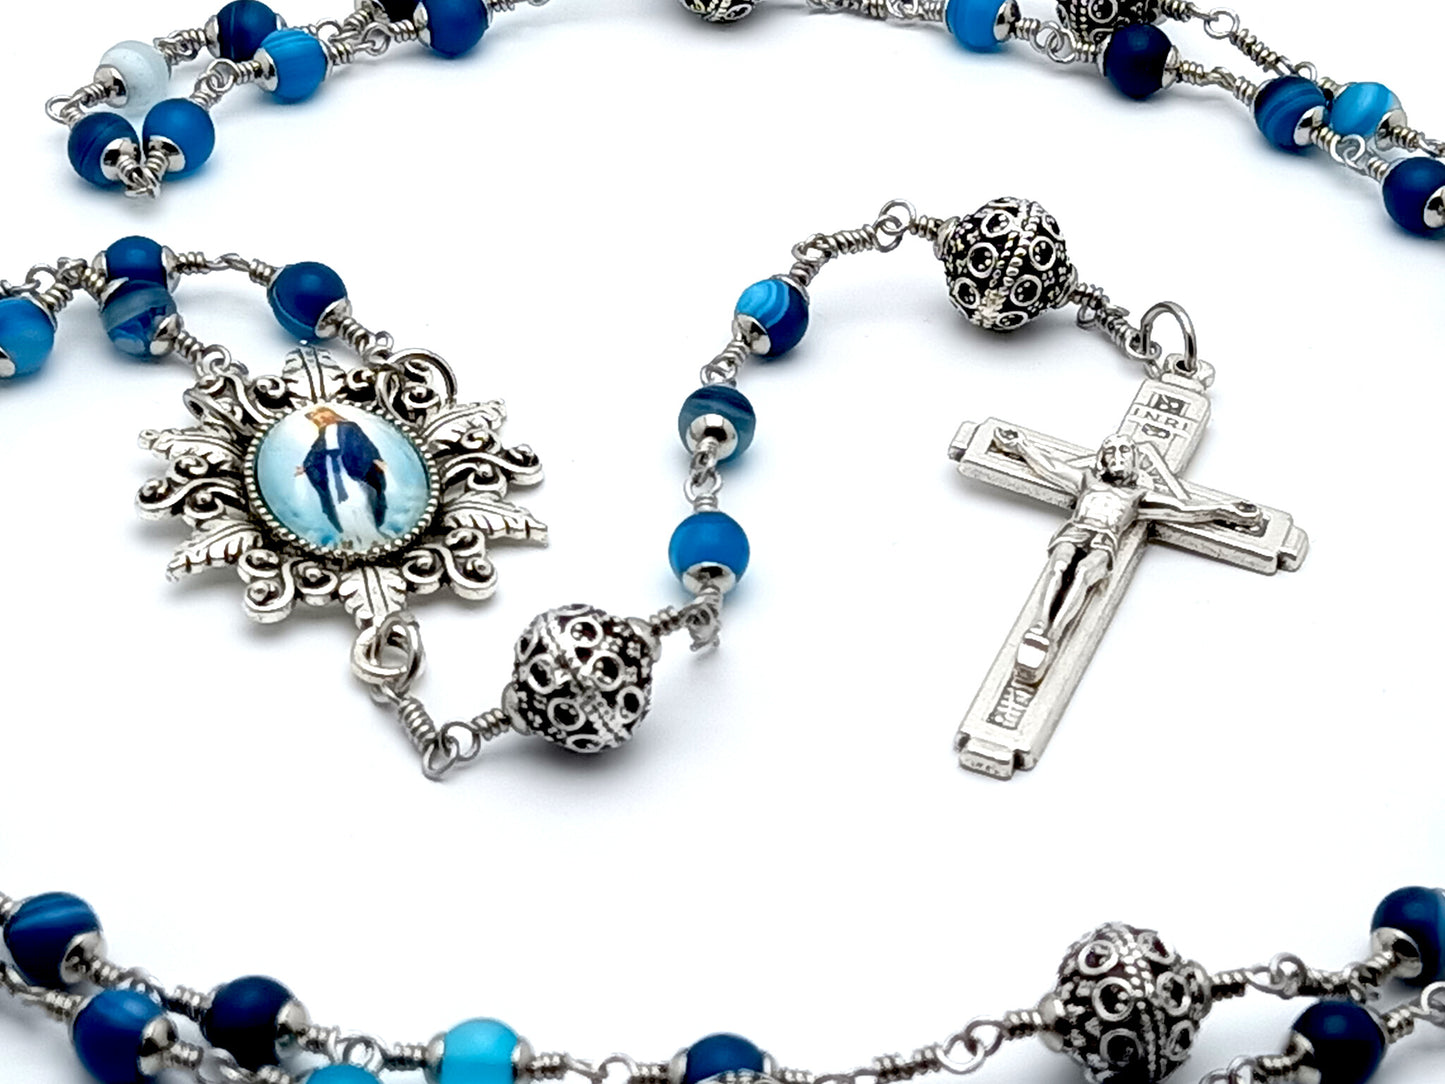 Our Lady of Grace unbeakable unique rosary beads with blue frosted agate gemstone beads and silver pater beads, picture centre medal and crucifix.